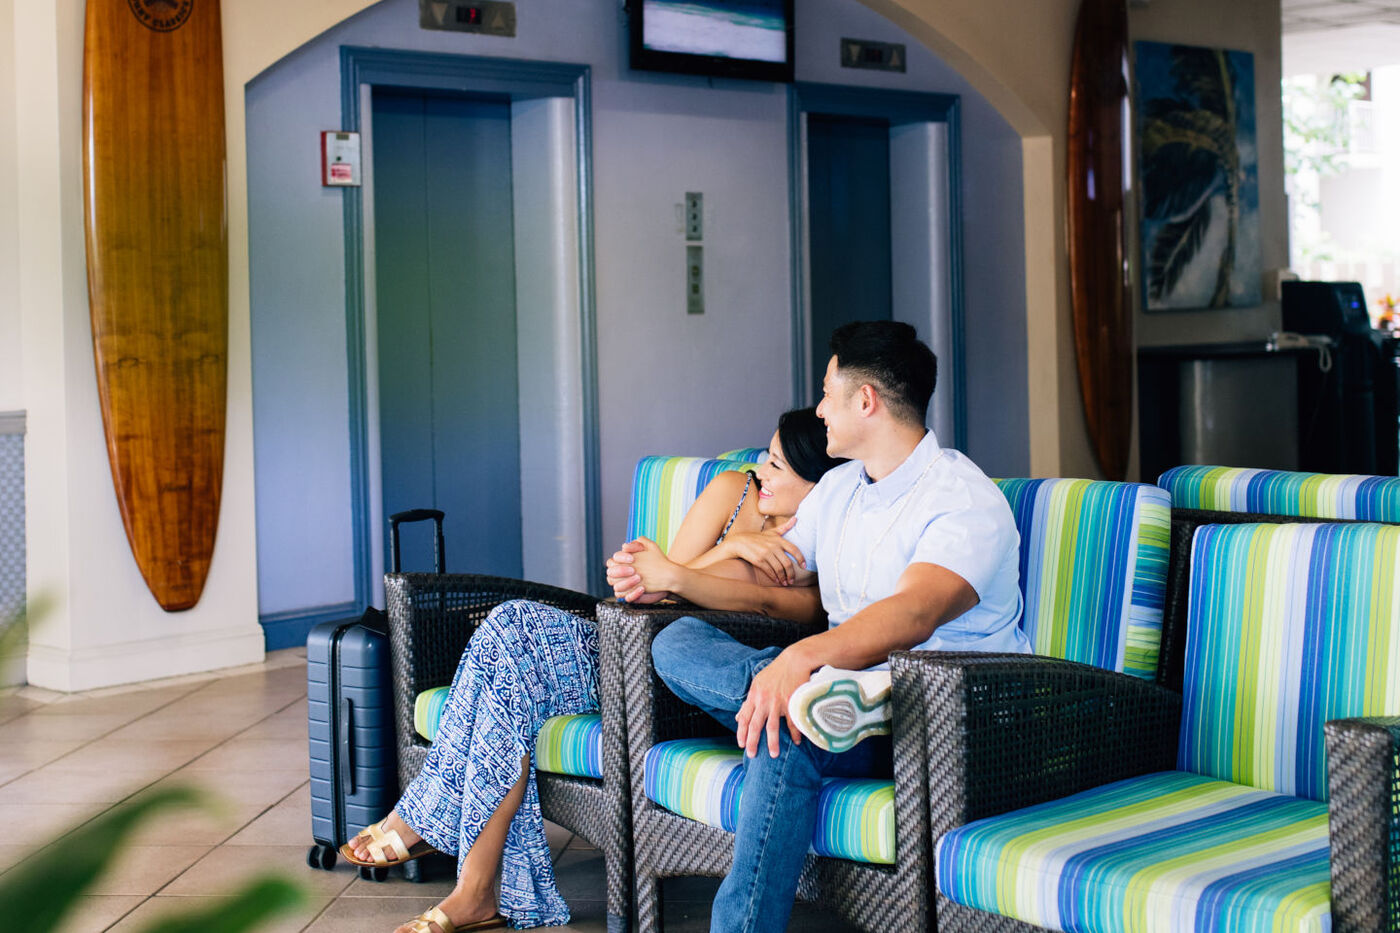 Lobby seating area with couple sitting enjoying the comfortable chairs near the elevators and the iconic surf boards hanging on the wall